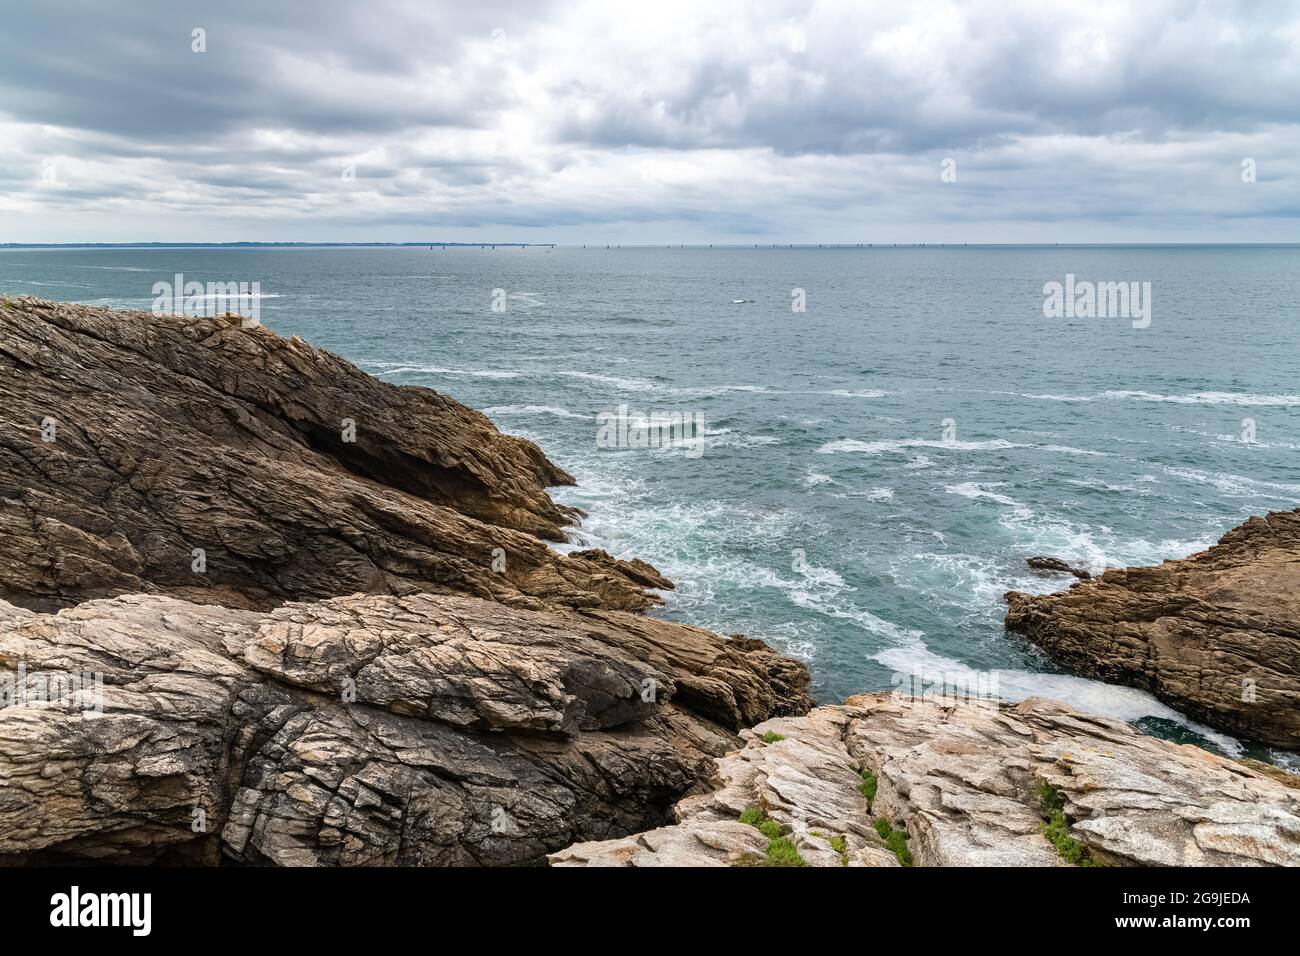 The Quiberon peninsula, in Brittany, beautiful seascape of the ocean, the rocky Cote sauvage Stock Photo